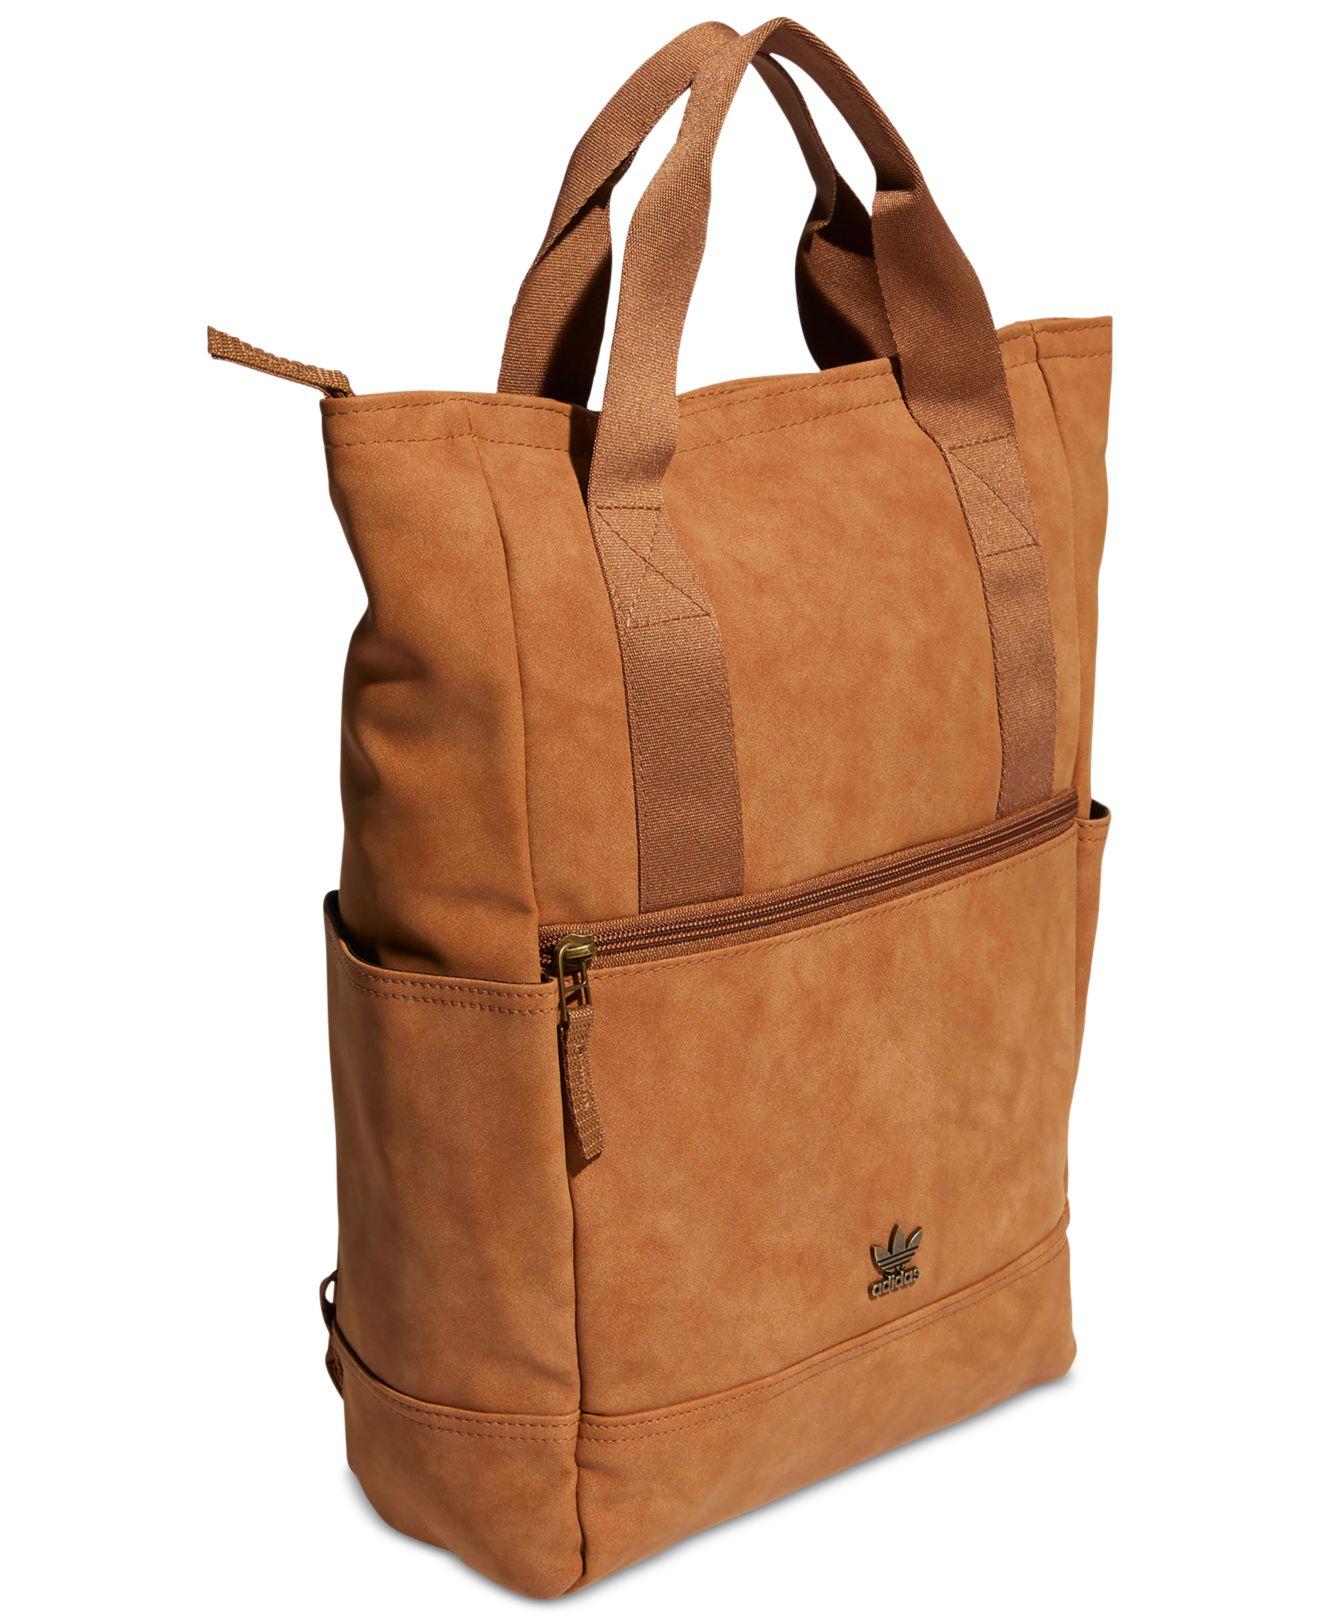 adidas Originals Tote 3 Faux-suede Backpack in Brown - Lyst